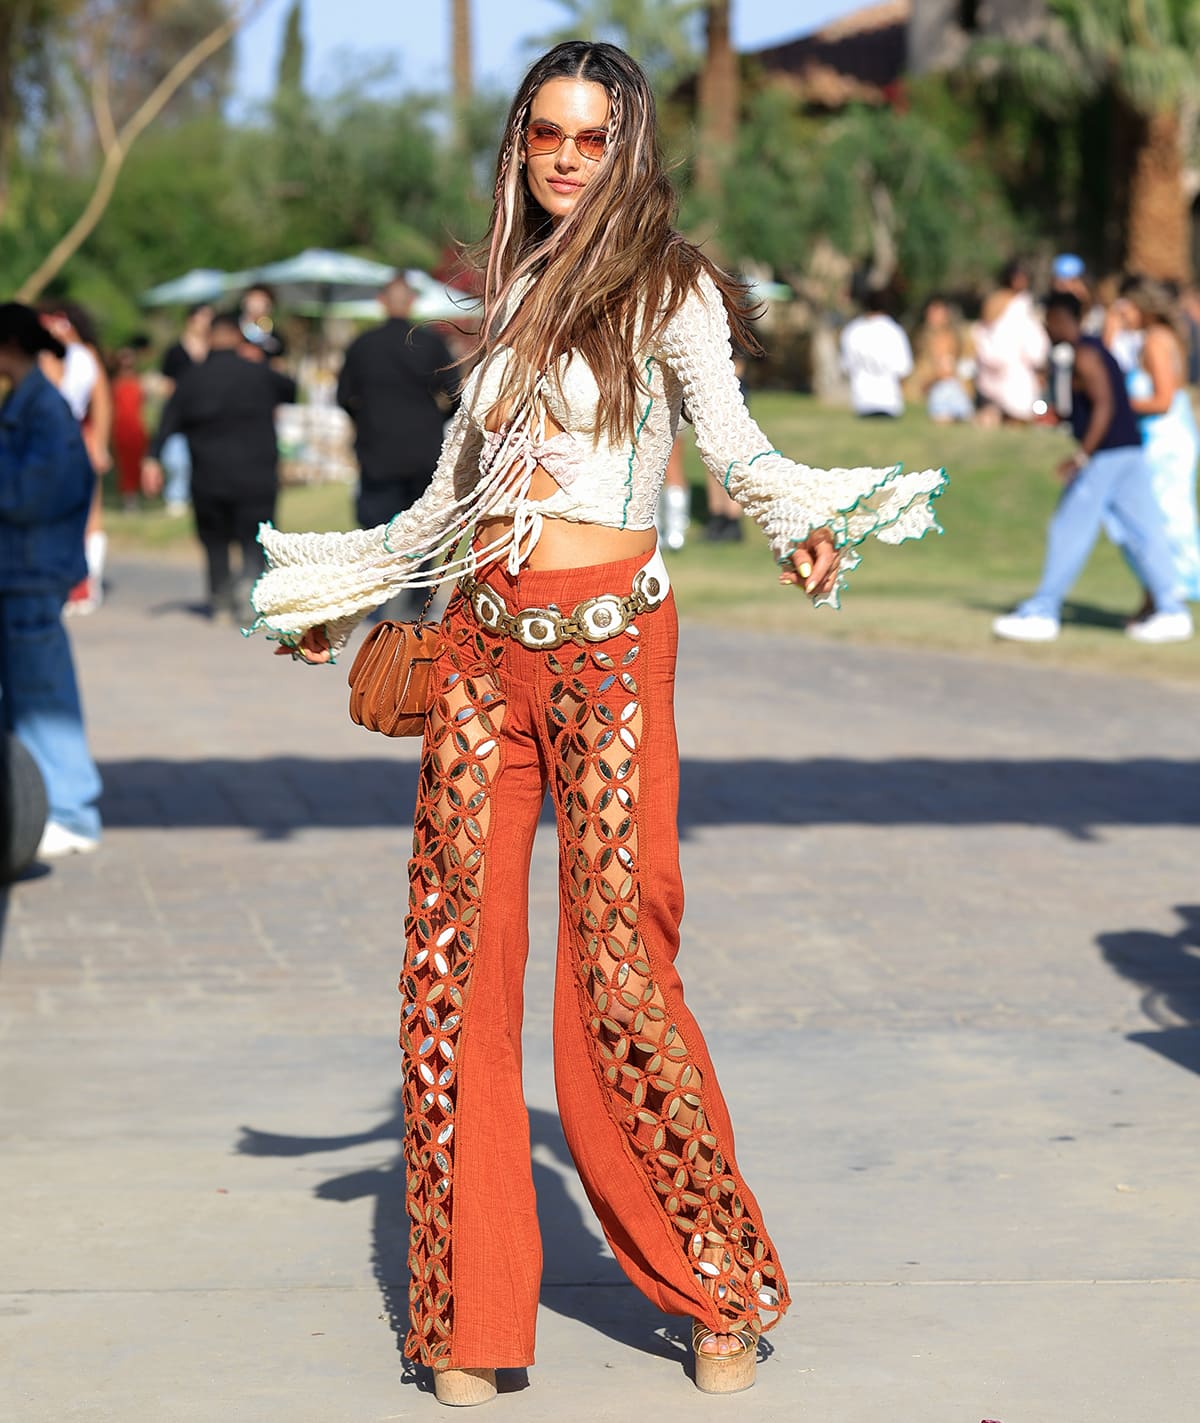 Alessandra Ambrosio attends Celsius’ Oasis Vibe House Party during the 2023 Coachella Music and Arts Festival on April 15, 2023